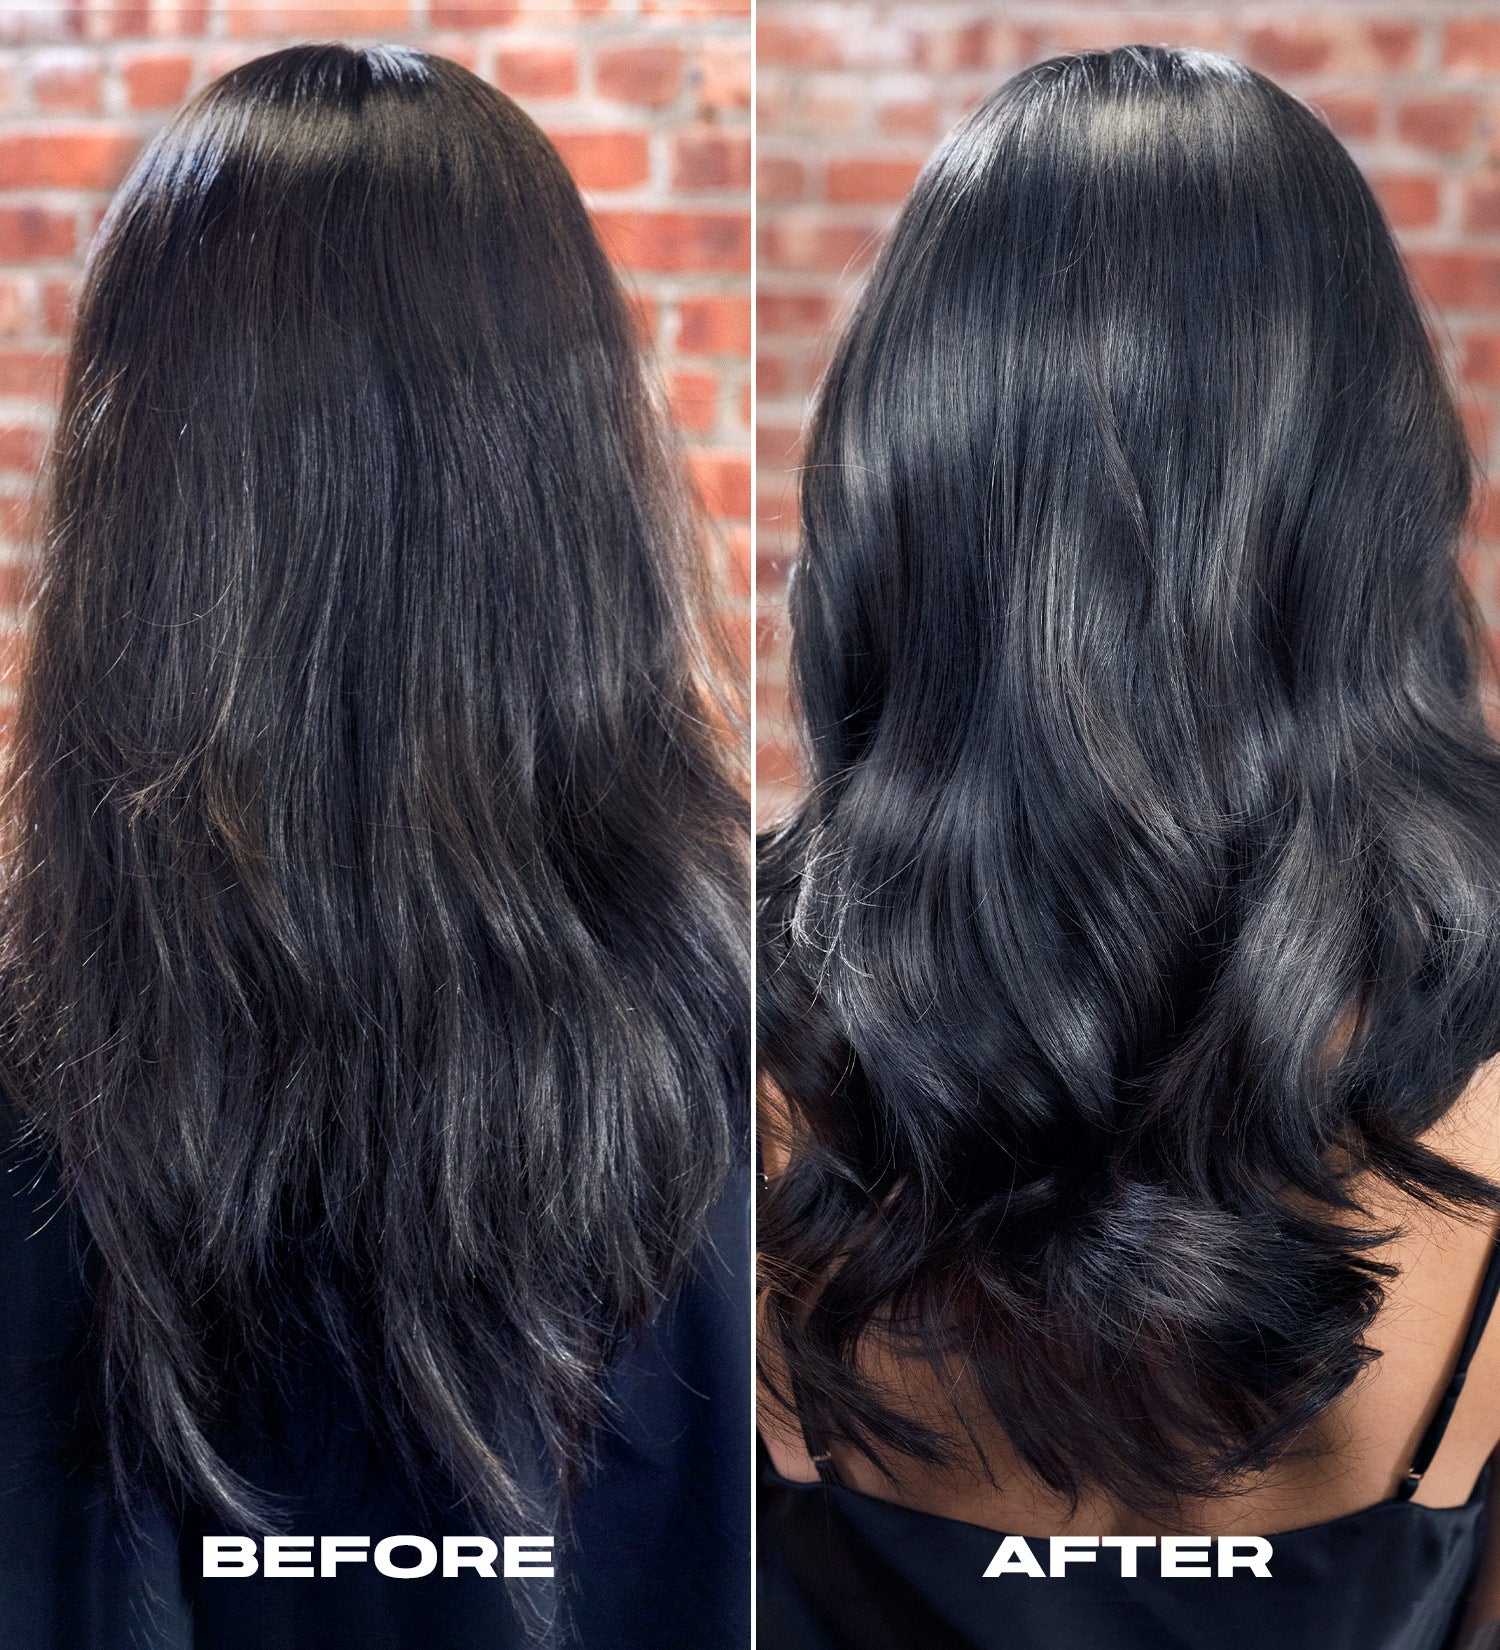 Hair before and after using Super Gloss